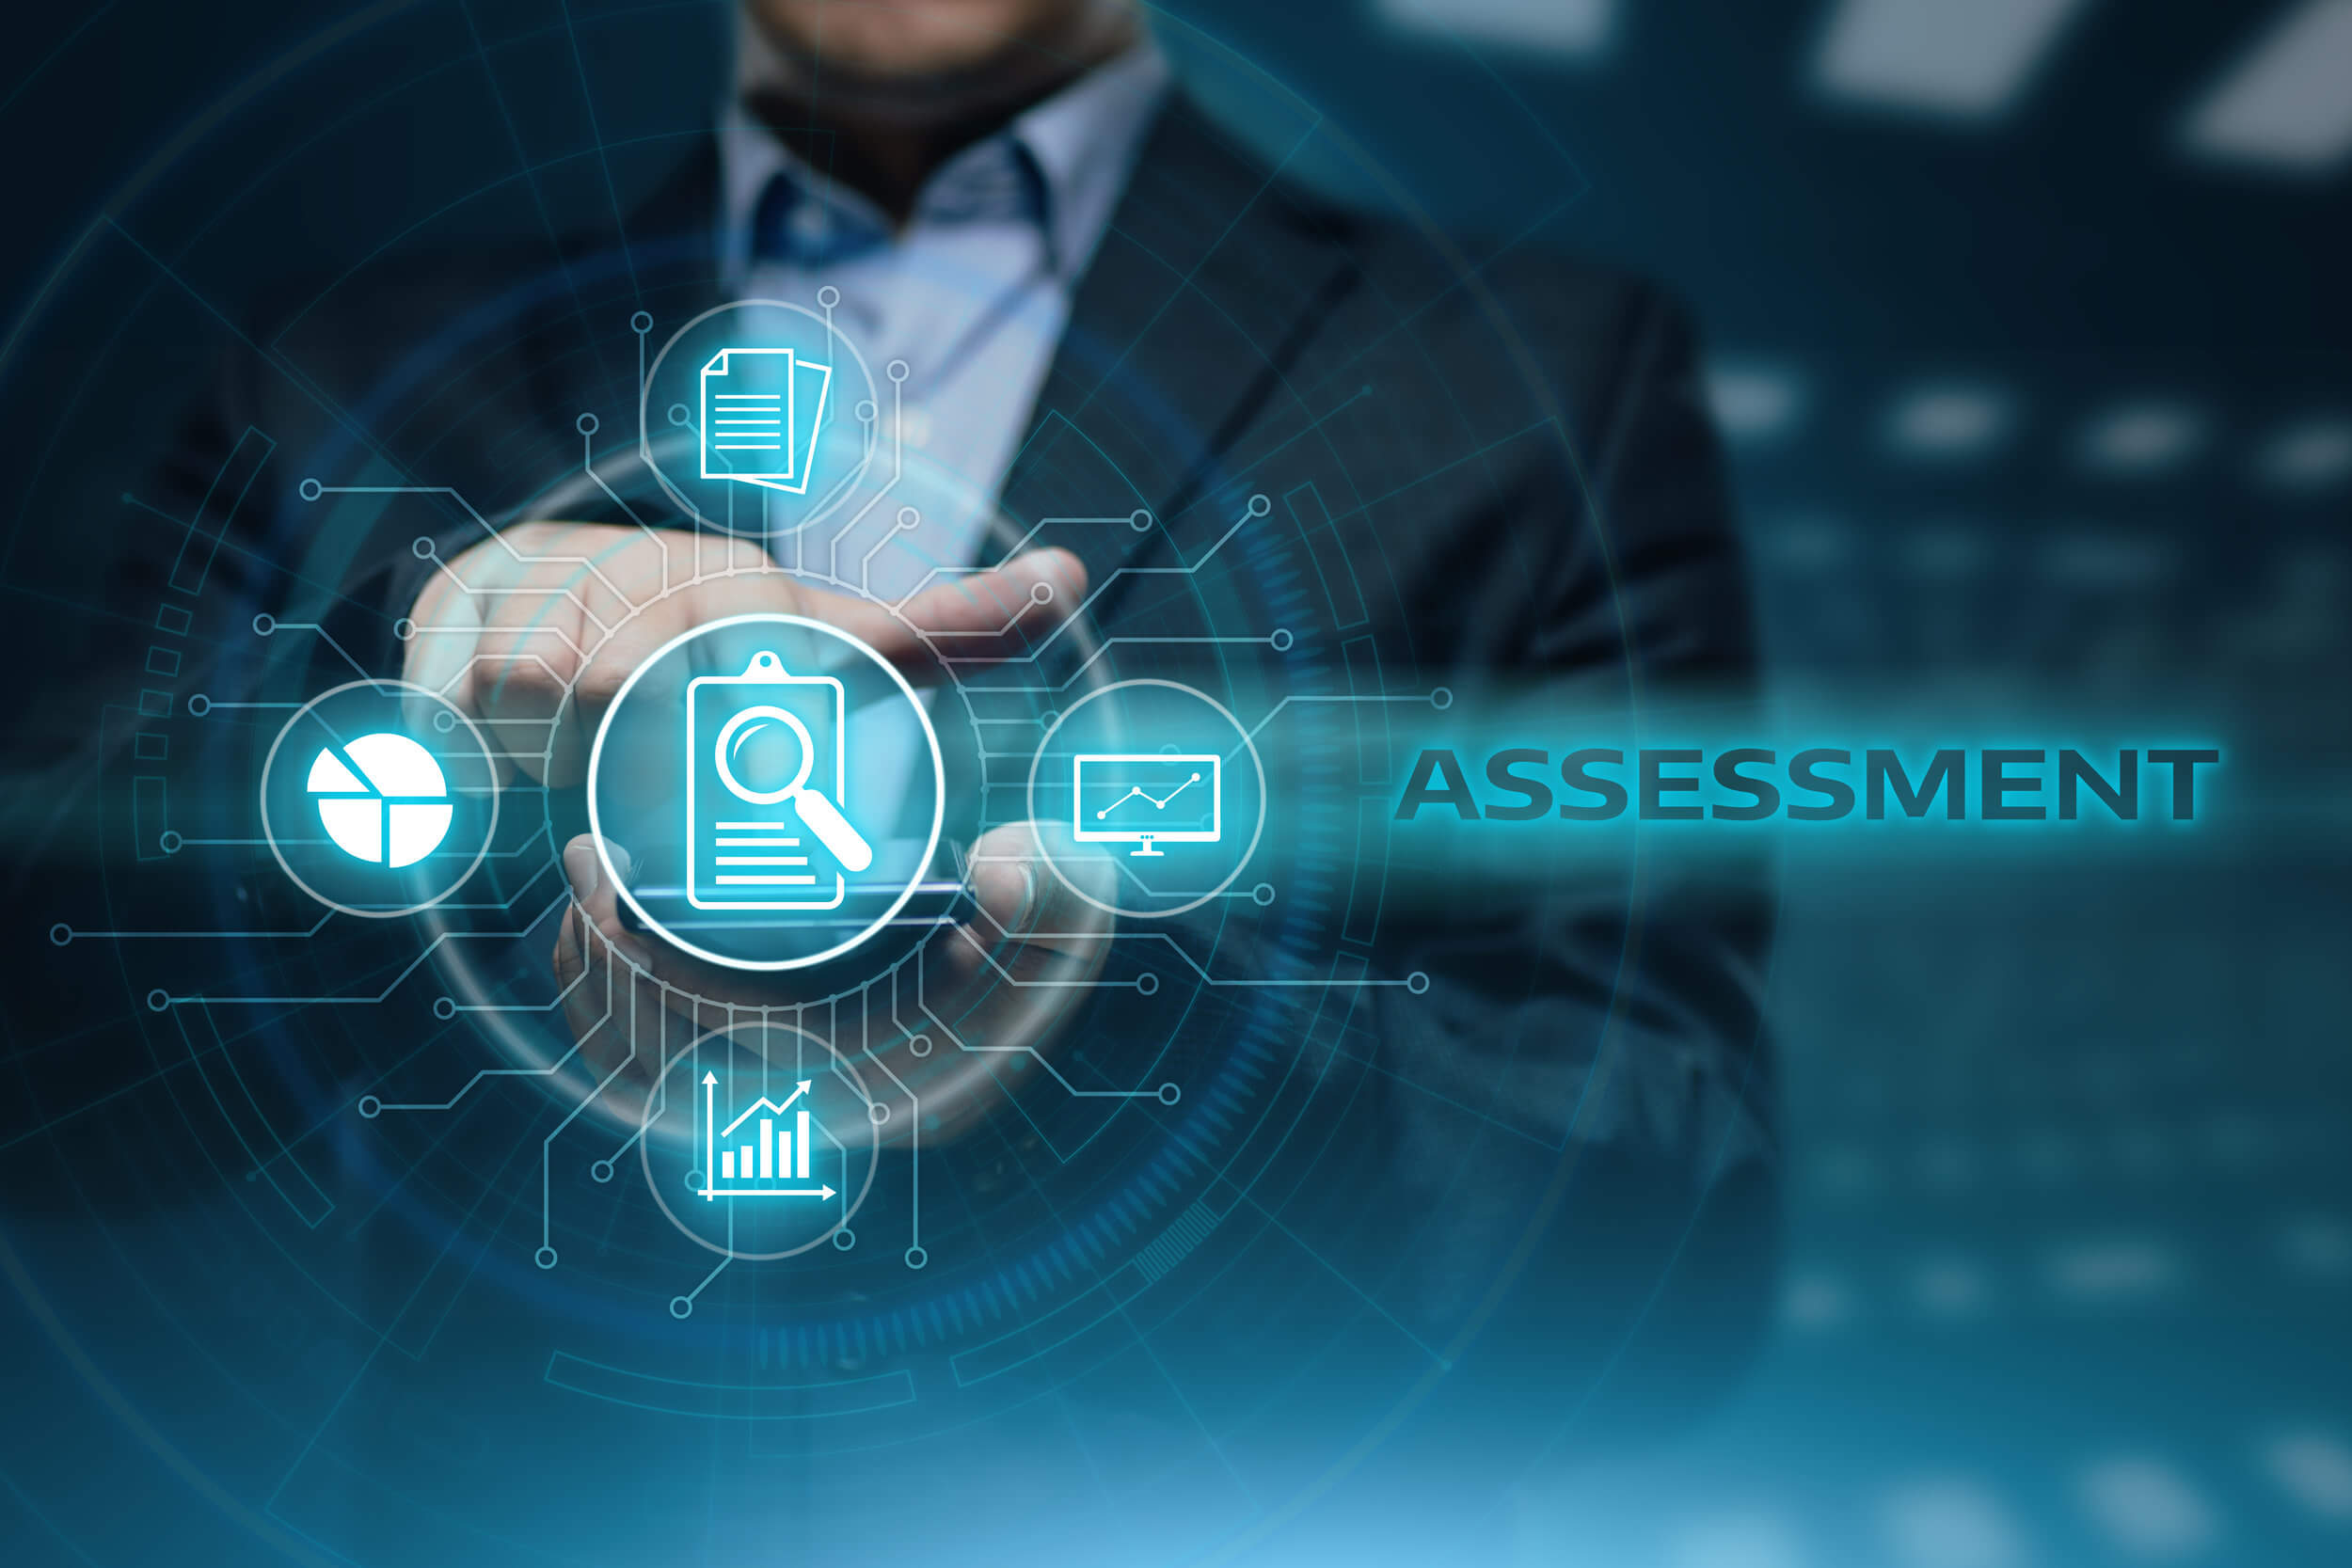 blockchain-assessment abstract image